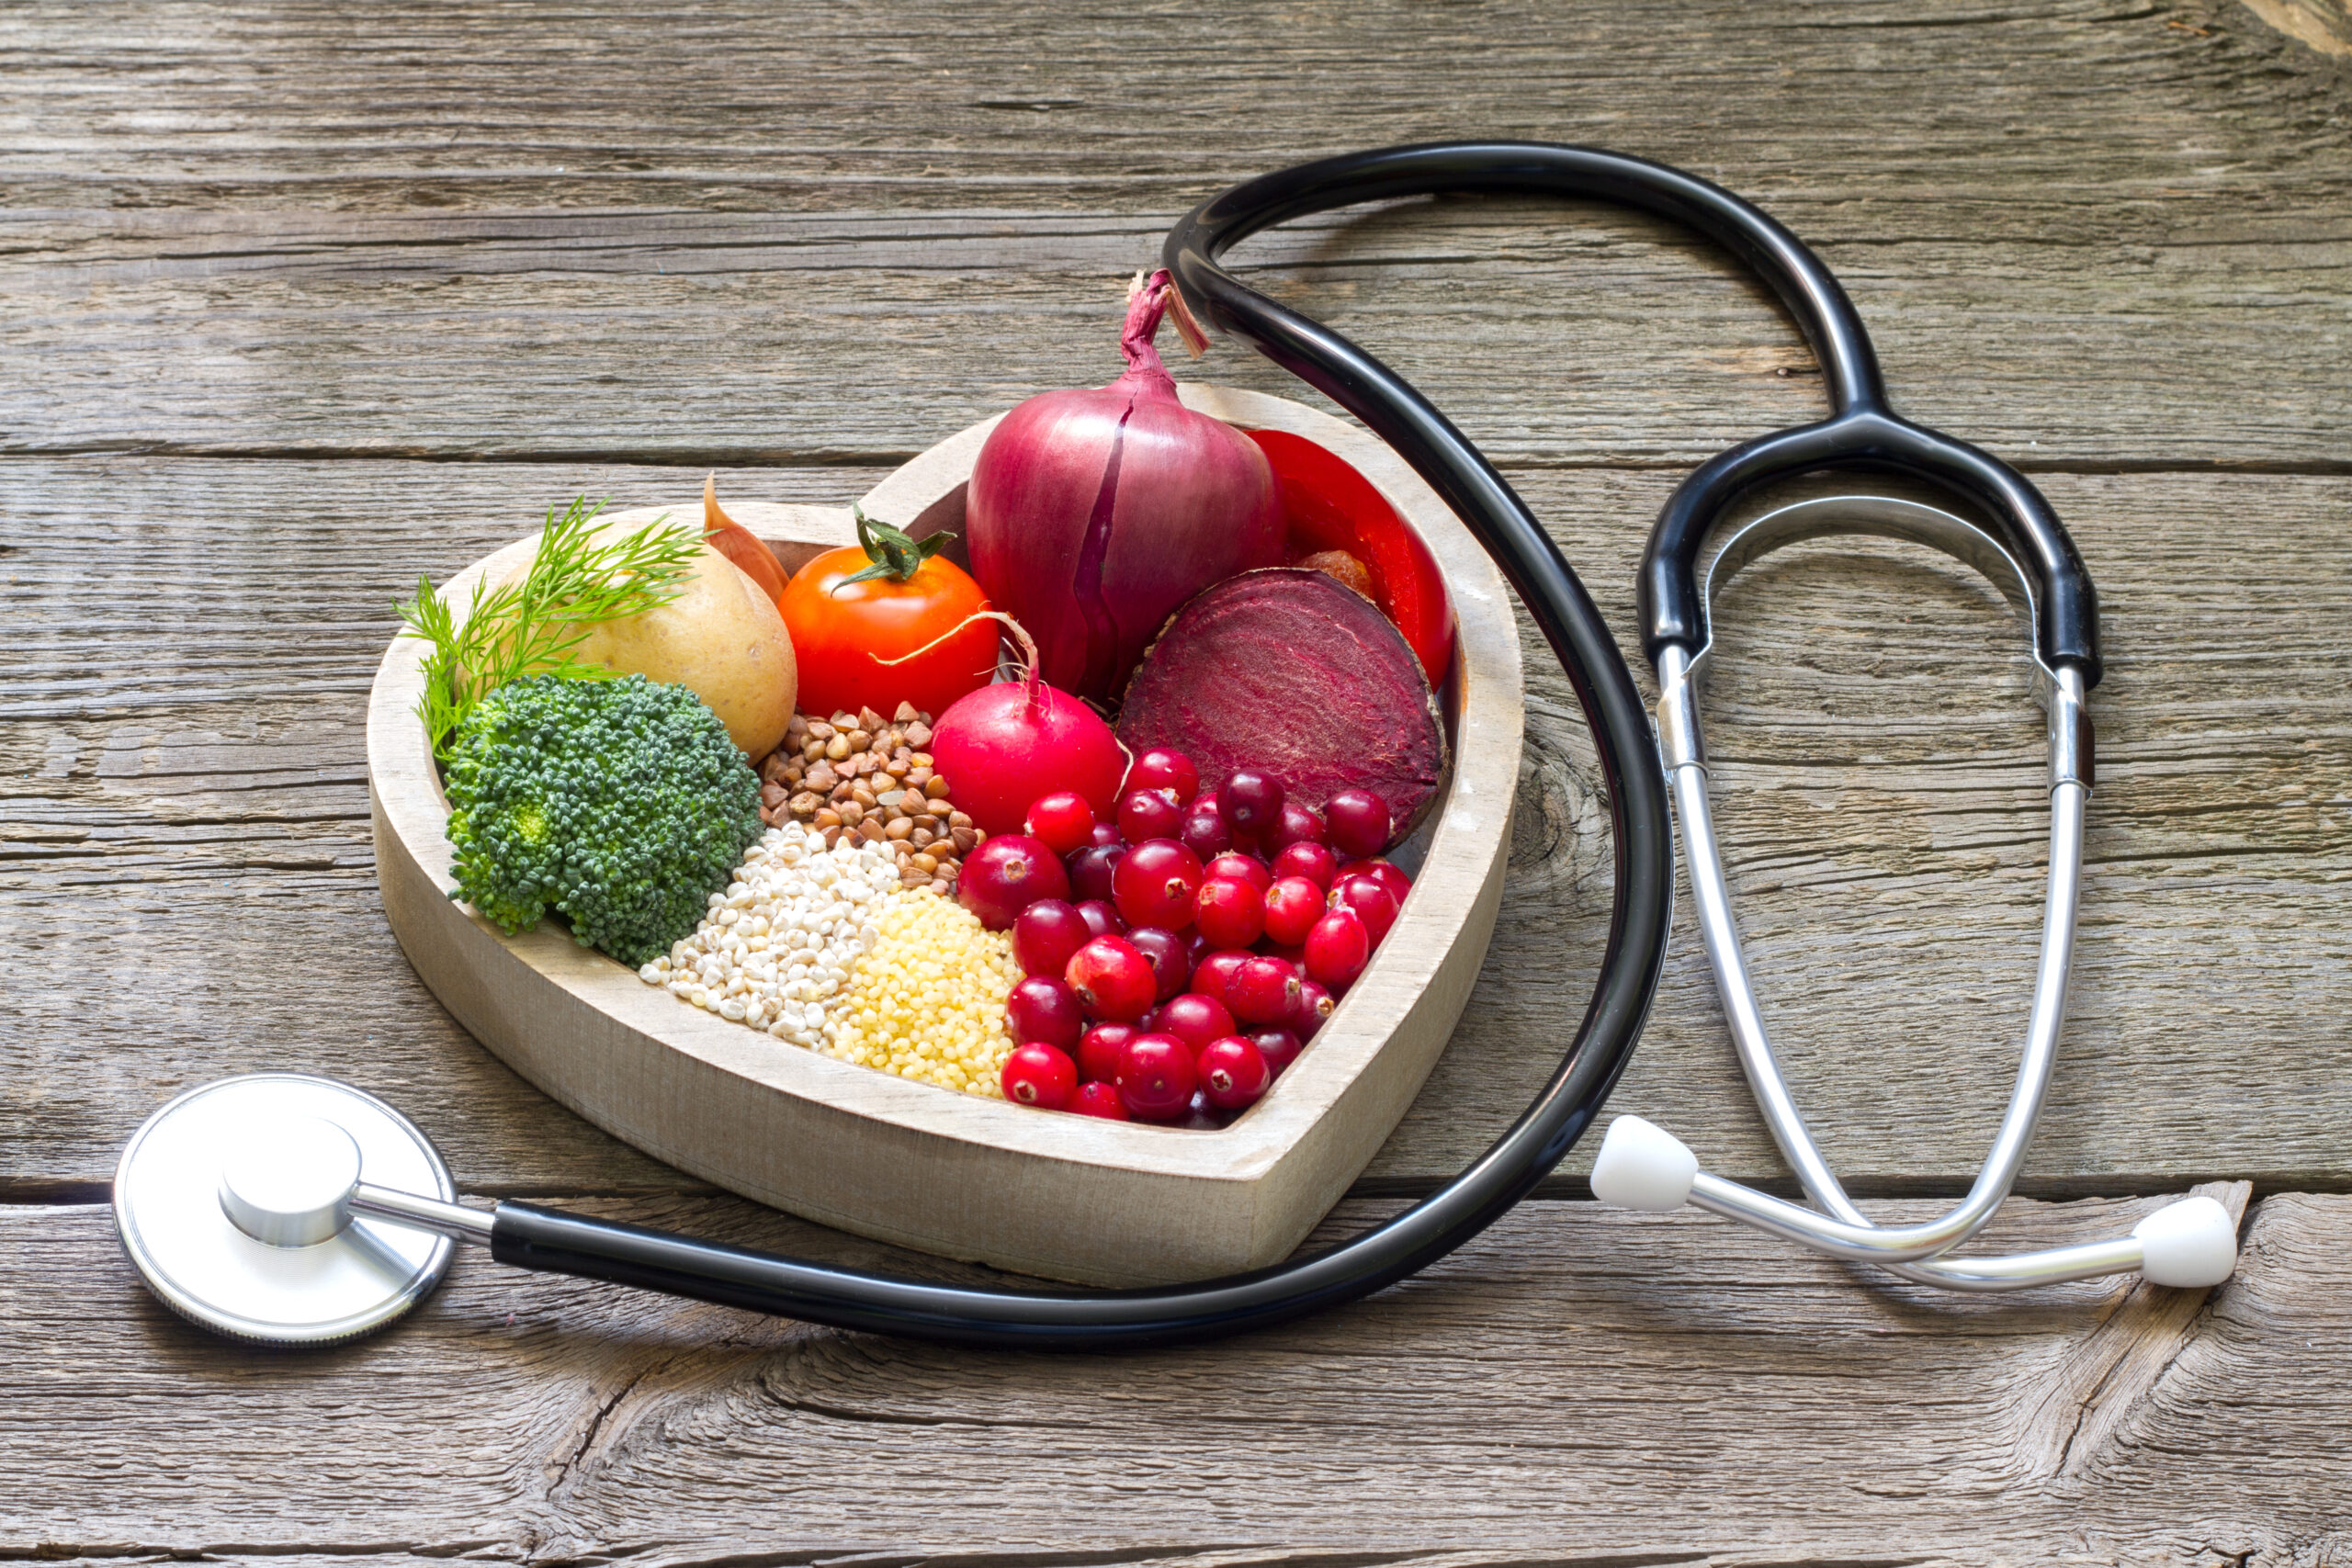 A heart shaped bowl full or healthy fruits and vegetables sits on a table next to a doctor's stethoscope.